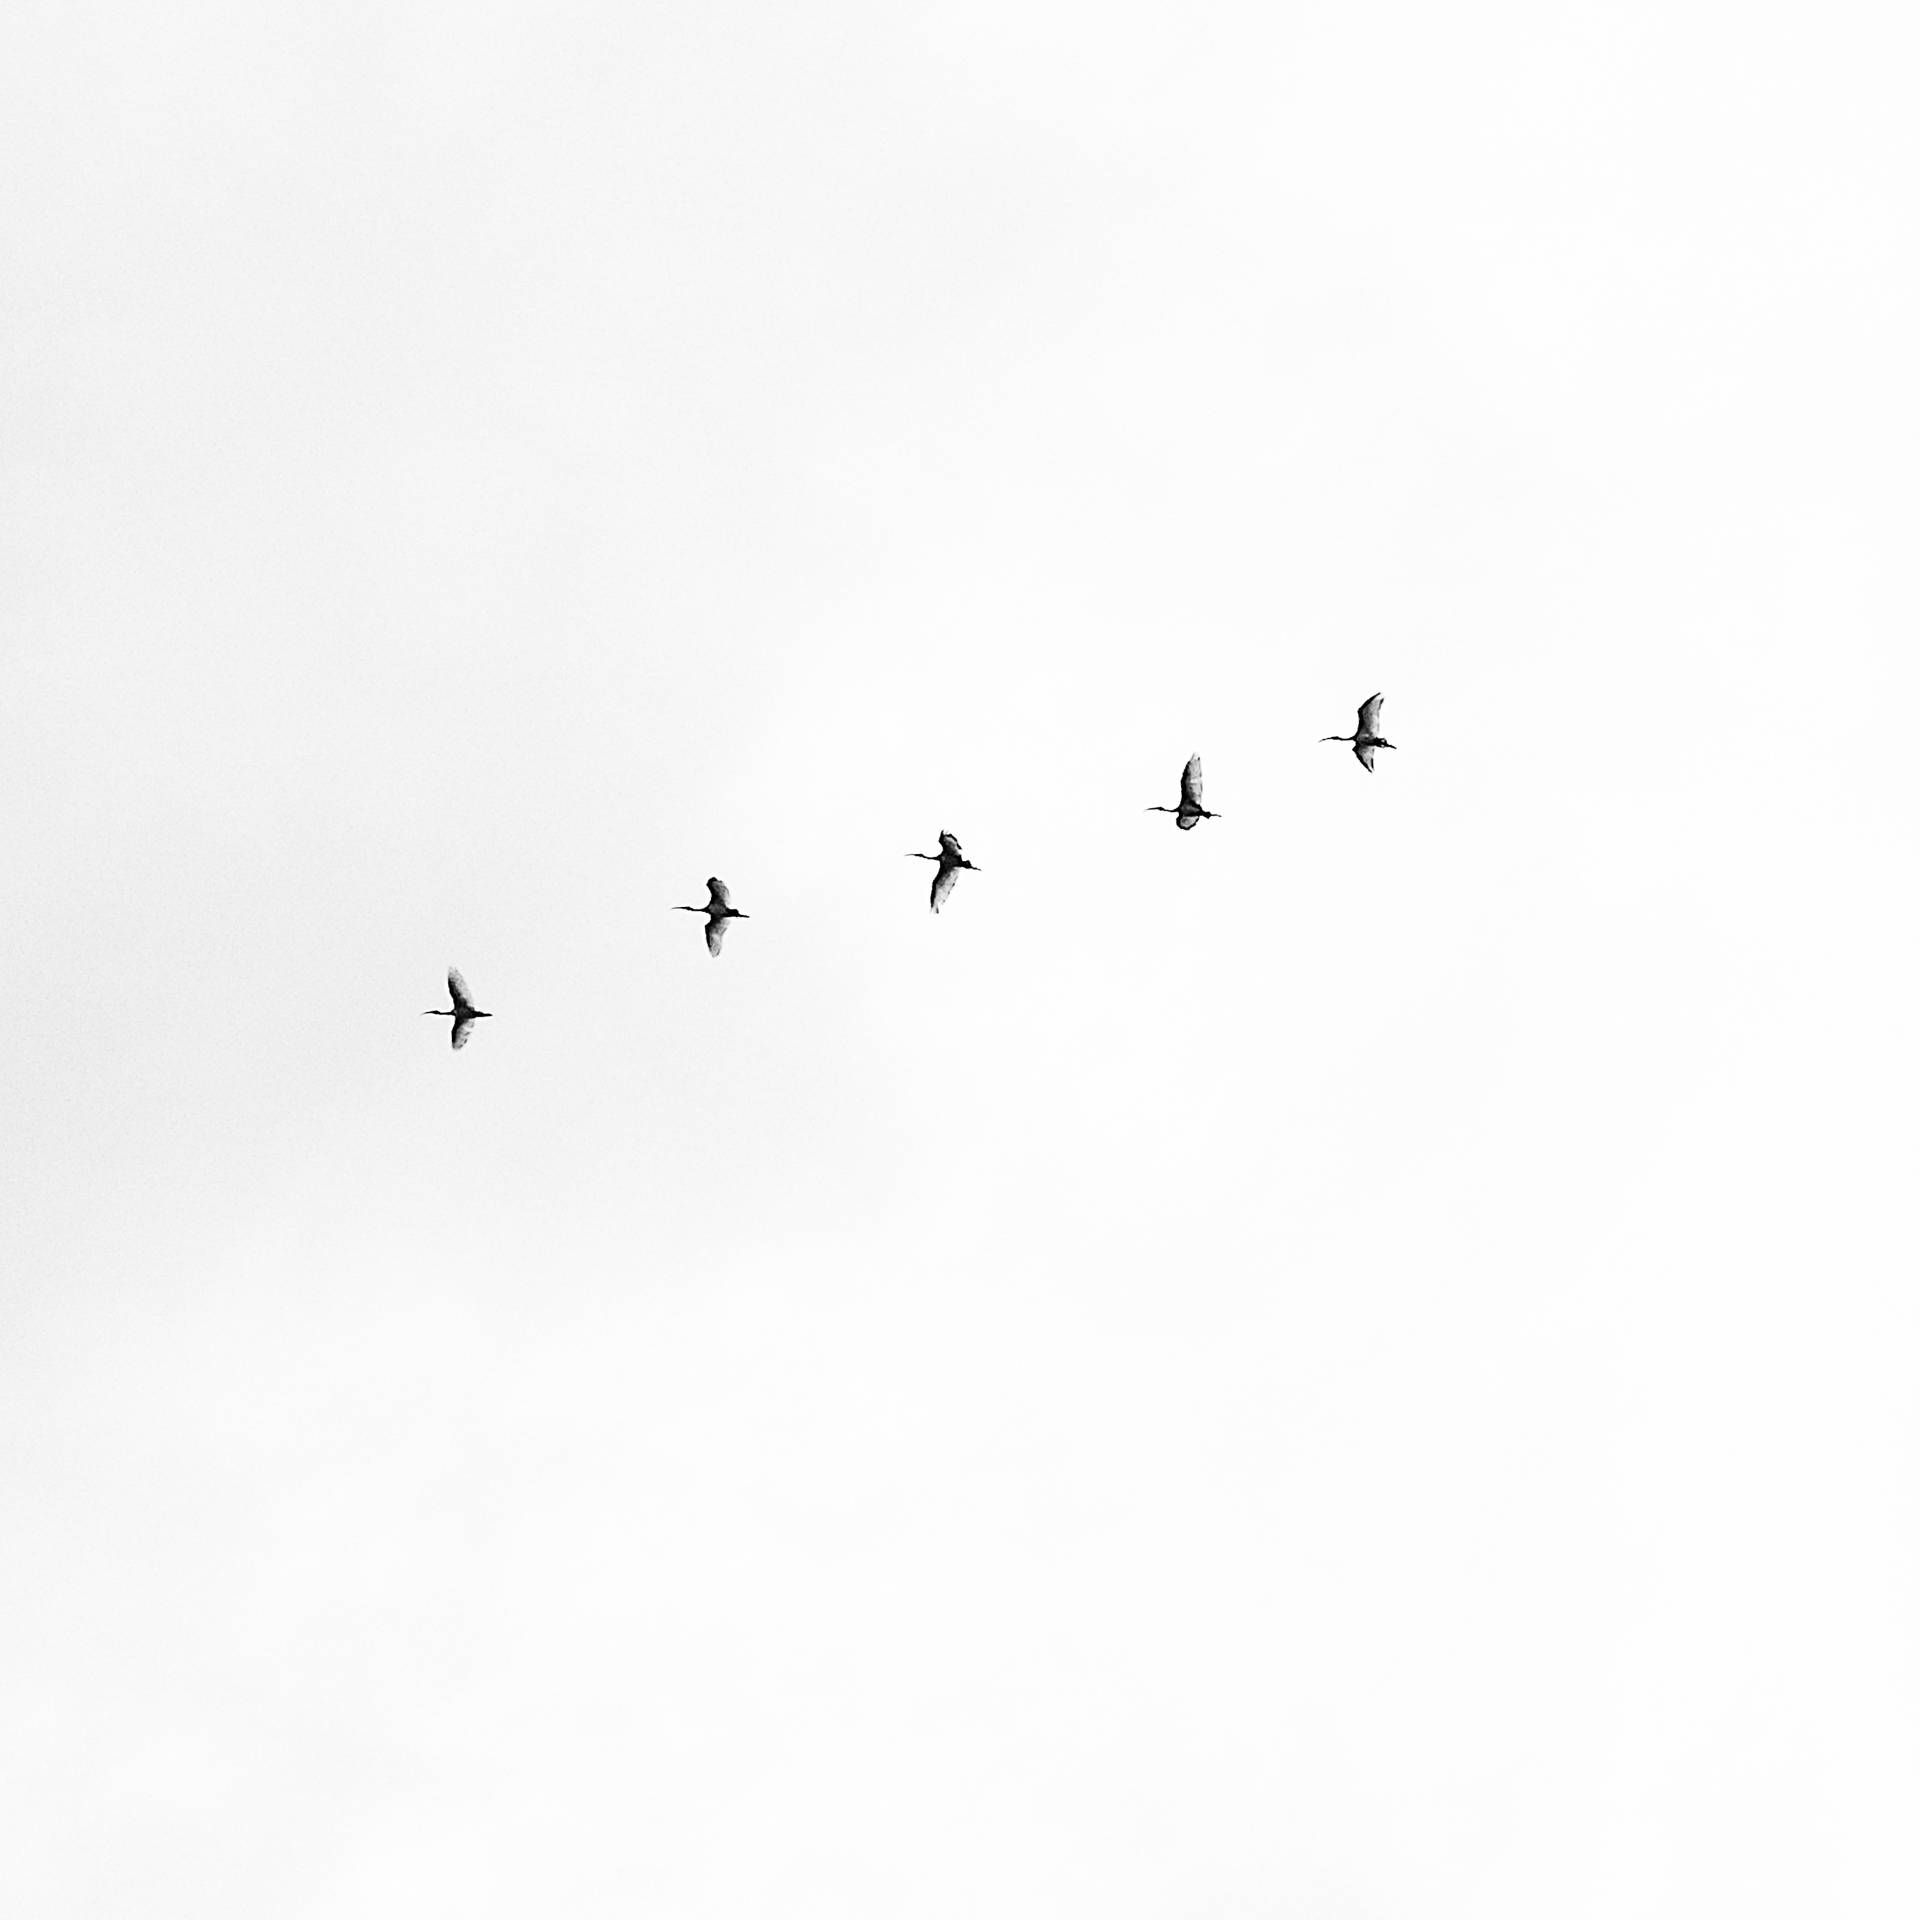 A flock of birds flying in the sky. - Clean, minimalist, white